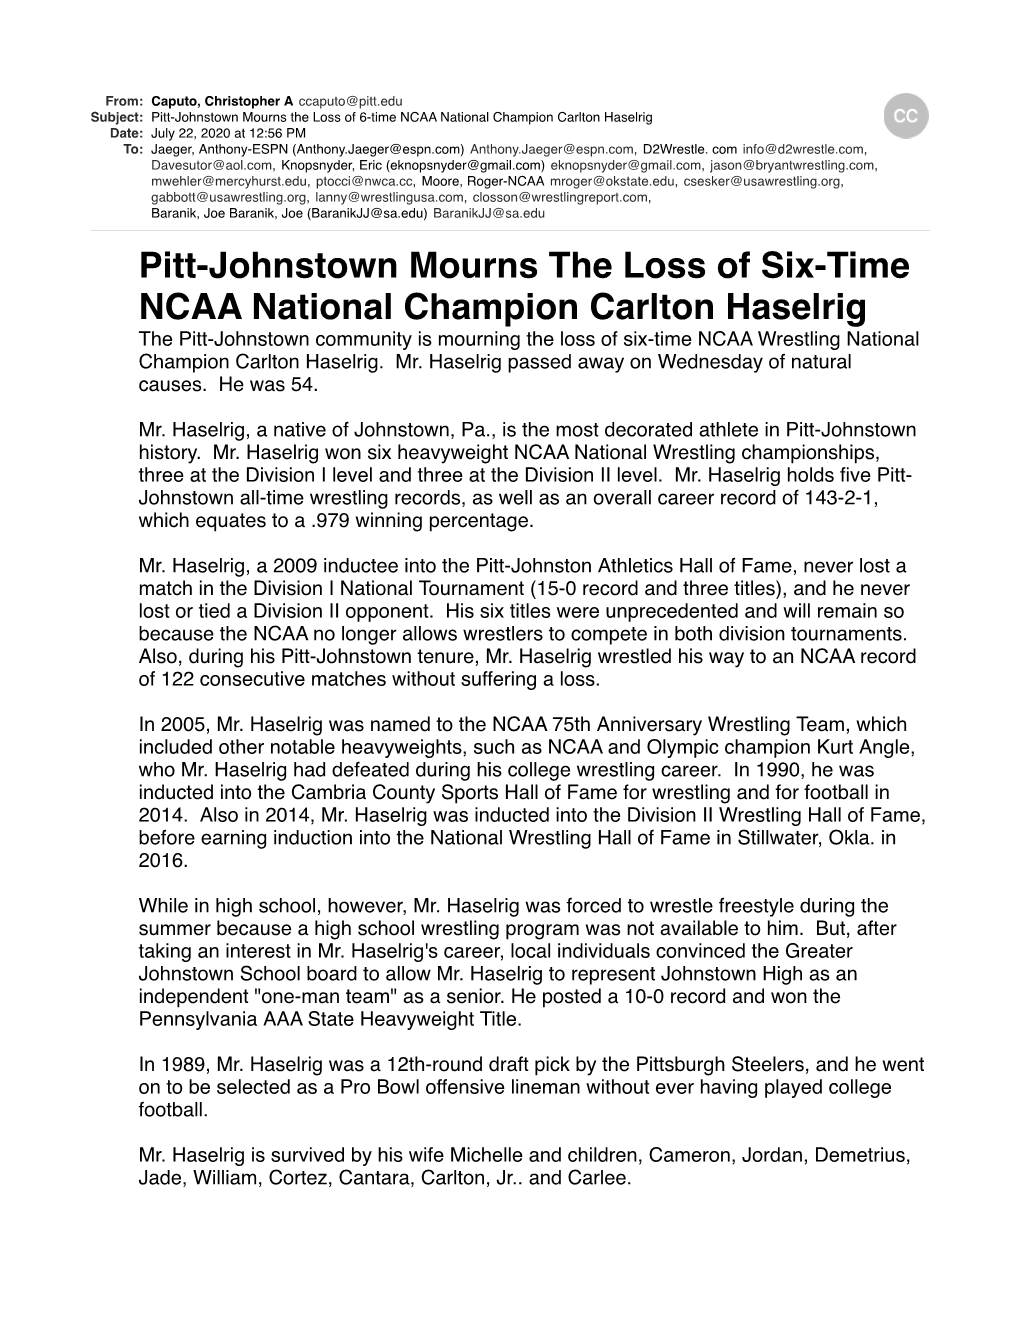 Pittjohnstown Mourns the Loss of 6Time NCAA National Champion